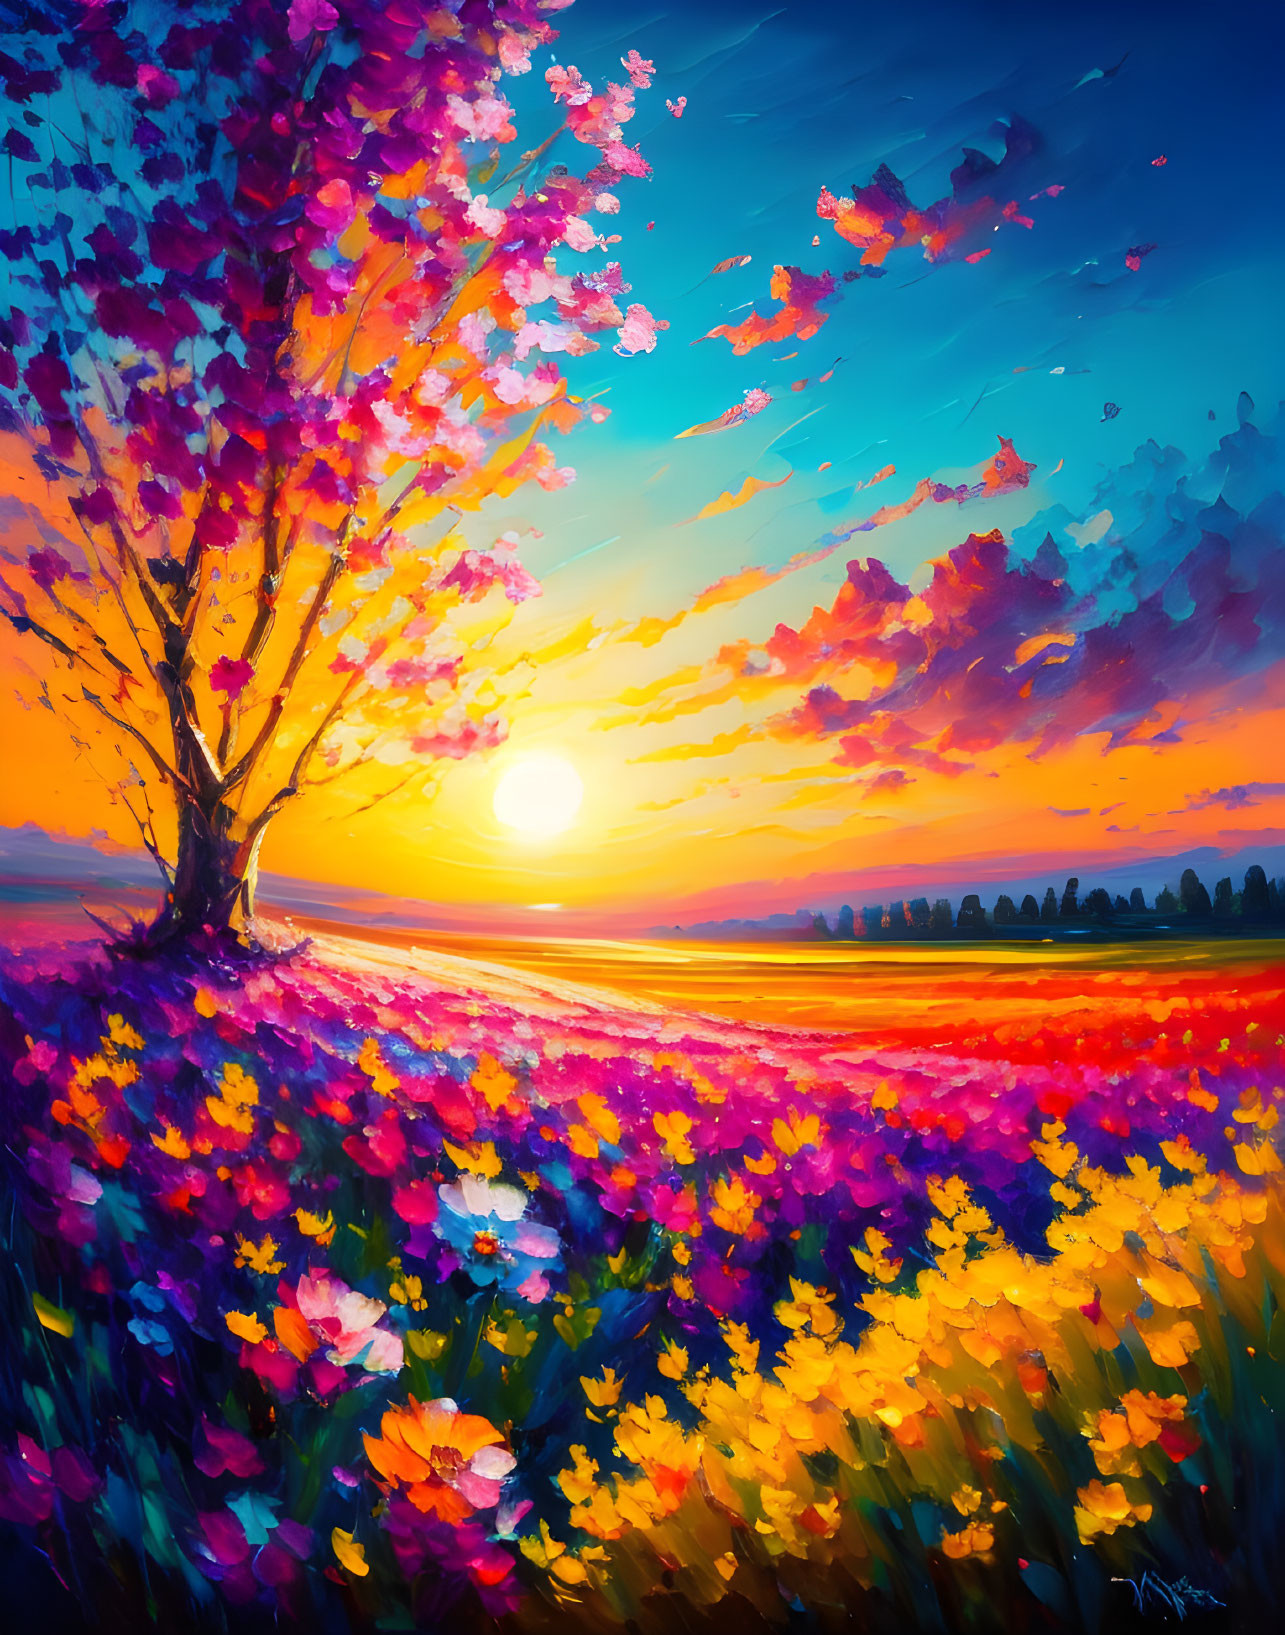 Colorful sunset painting with flower field and tree blending into sky